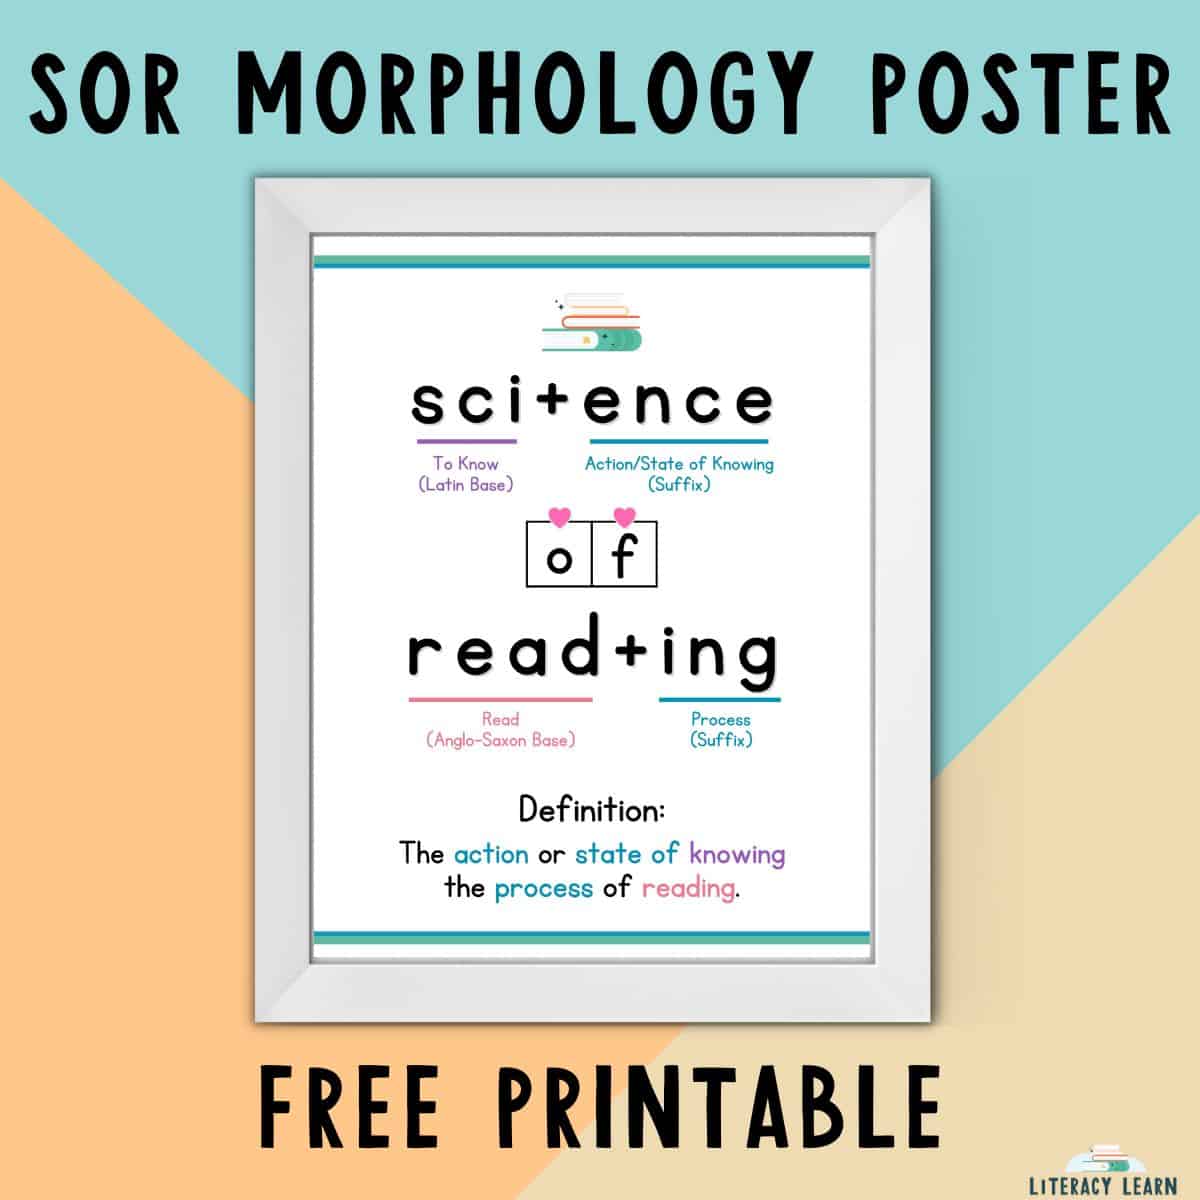 Framed Science of Reading morphology poster on blue and peach background with words "free printable." 